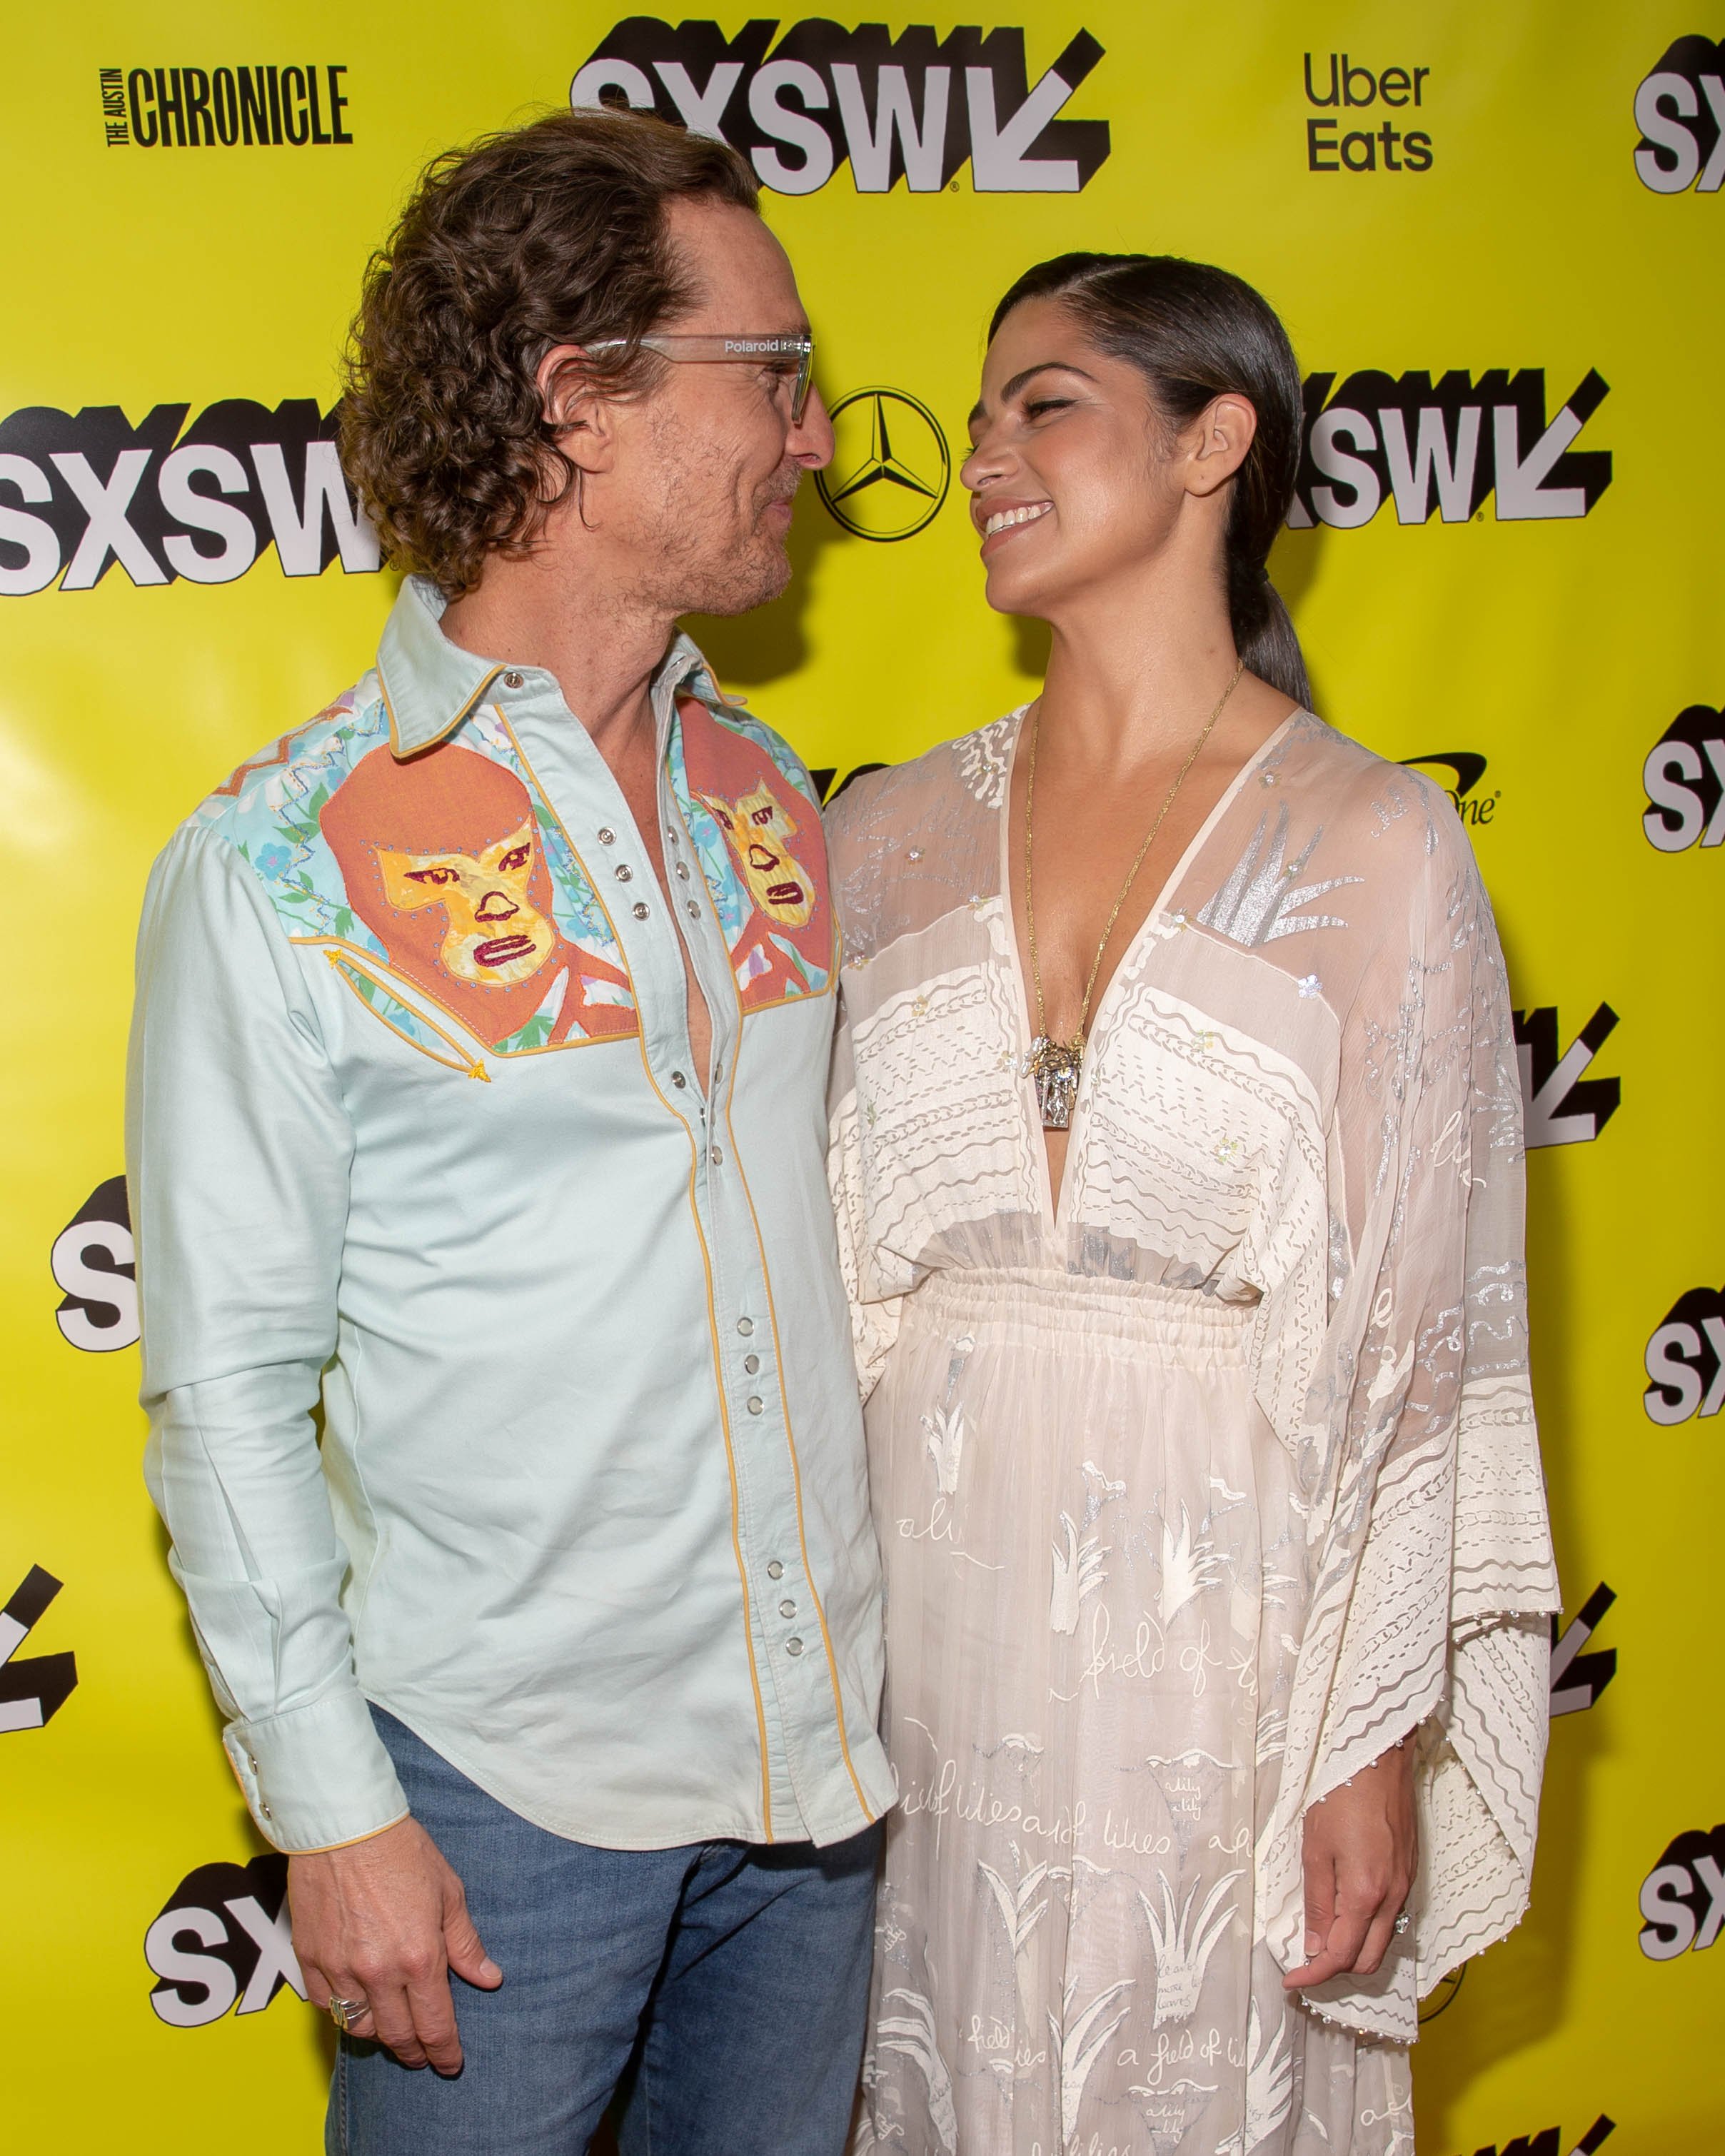 Actor Matthew McConaughey and wife Camila Alves at the premiere of "The Beach Bum" on March 9, 2019 in Austin, Texas. | Source: Getty Images